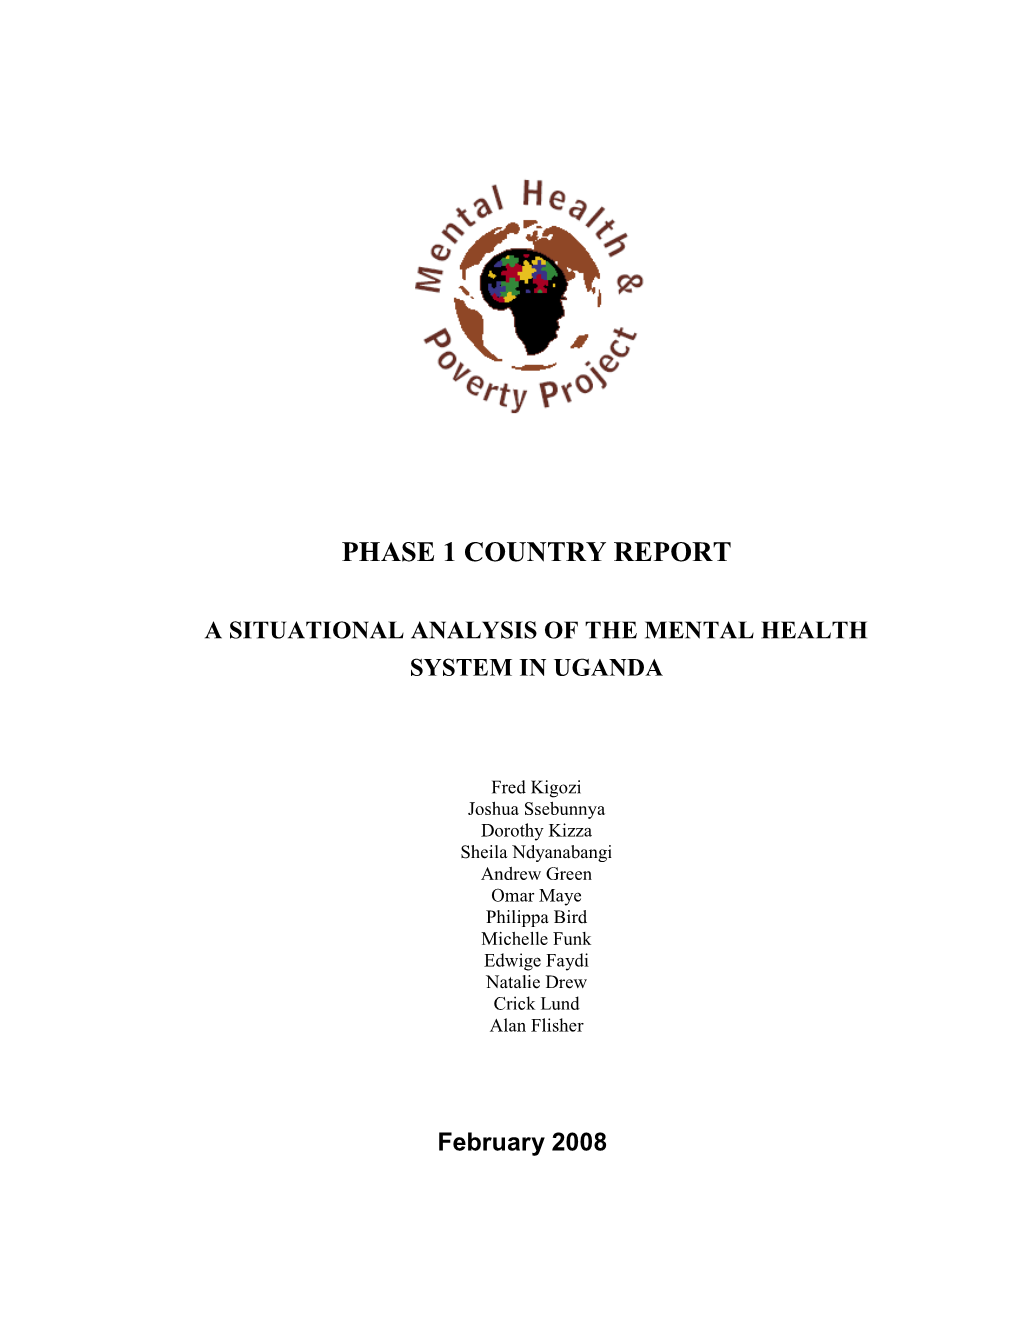 A Situational Analysis of the Mental Health System in Uganda